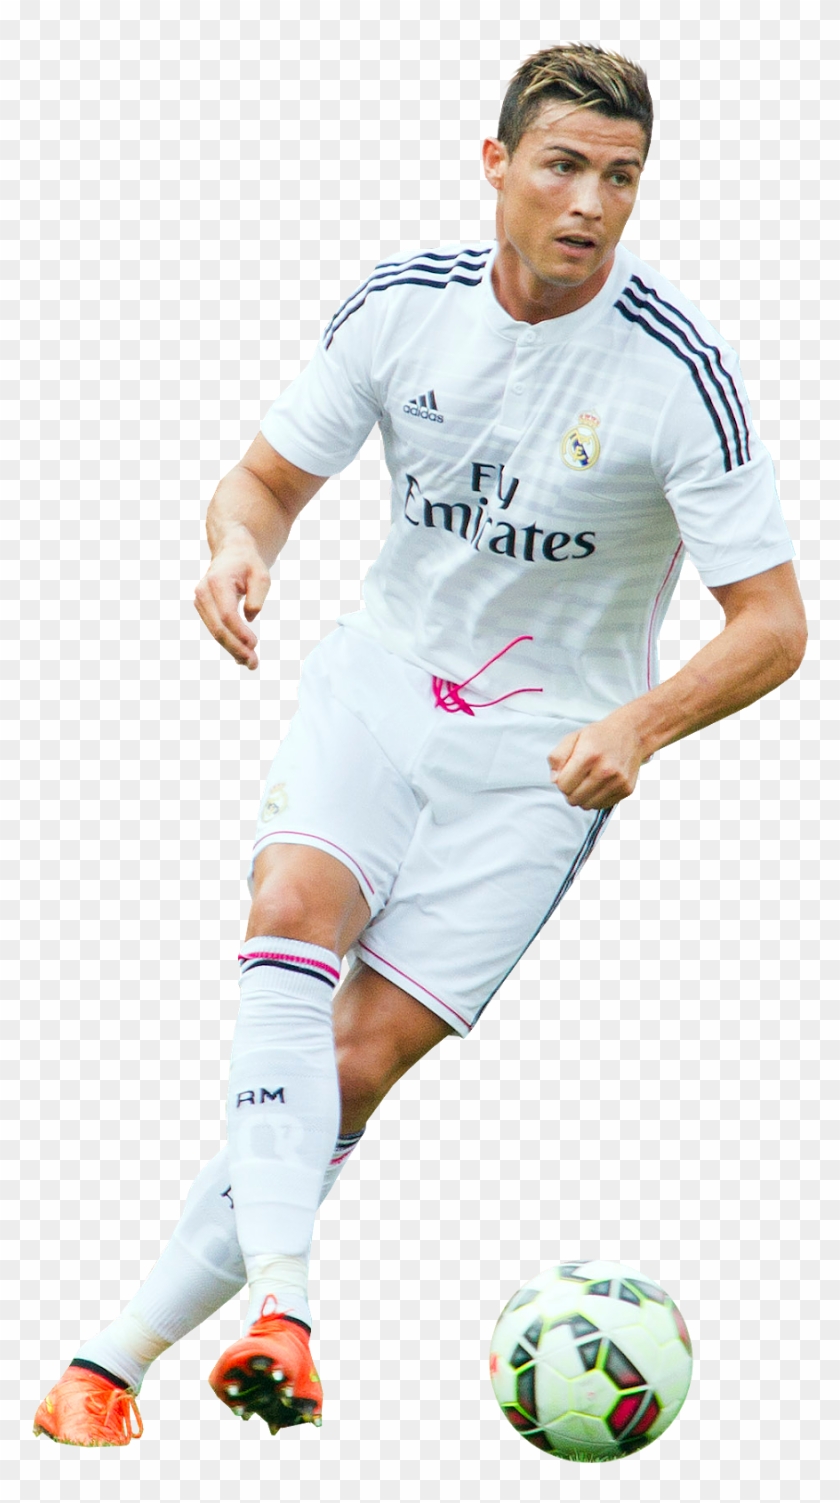 Cristiano Ronaldo Png Hd - Cristiano Ronaldo Png, Transparent Png ...